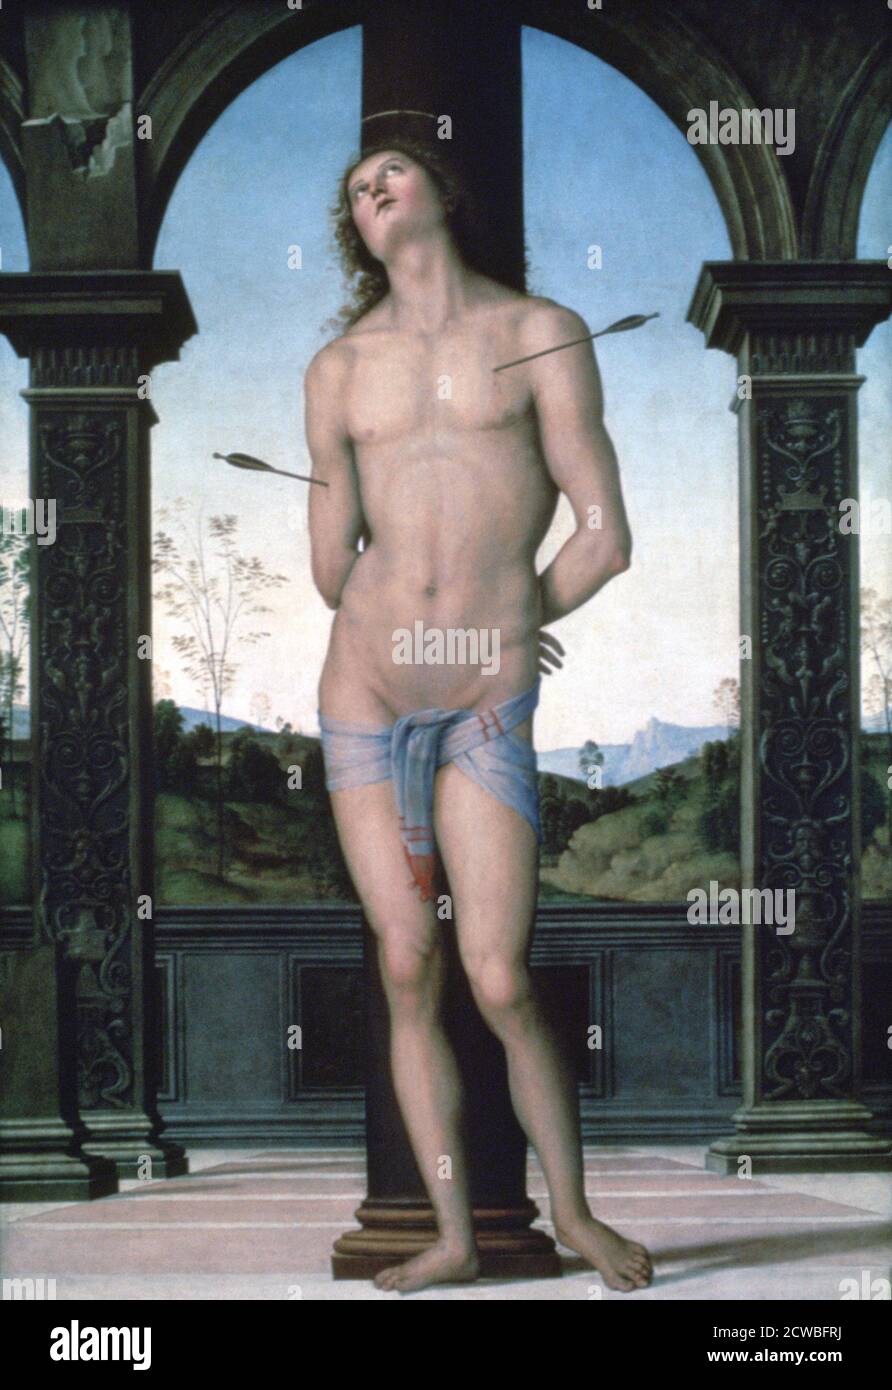 St Sebastian', c1470-1523. Artist: Perugino. Perugino (1446-1523) born Pietro Vannucci, was an Italian Renaissance painter of the Umbrian school, who developed some of the qualities that found classic expression in the High Renaissance. Stock Photo